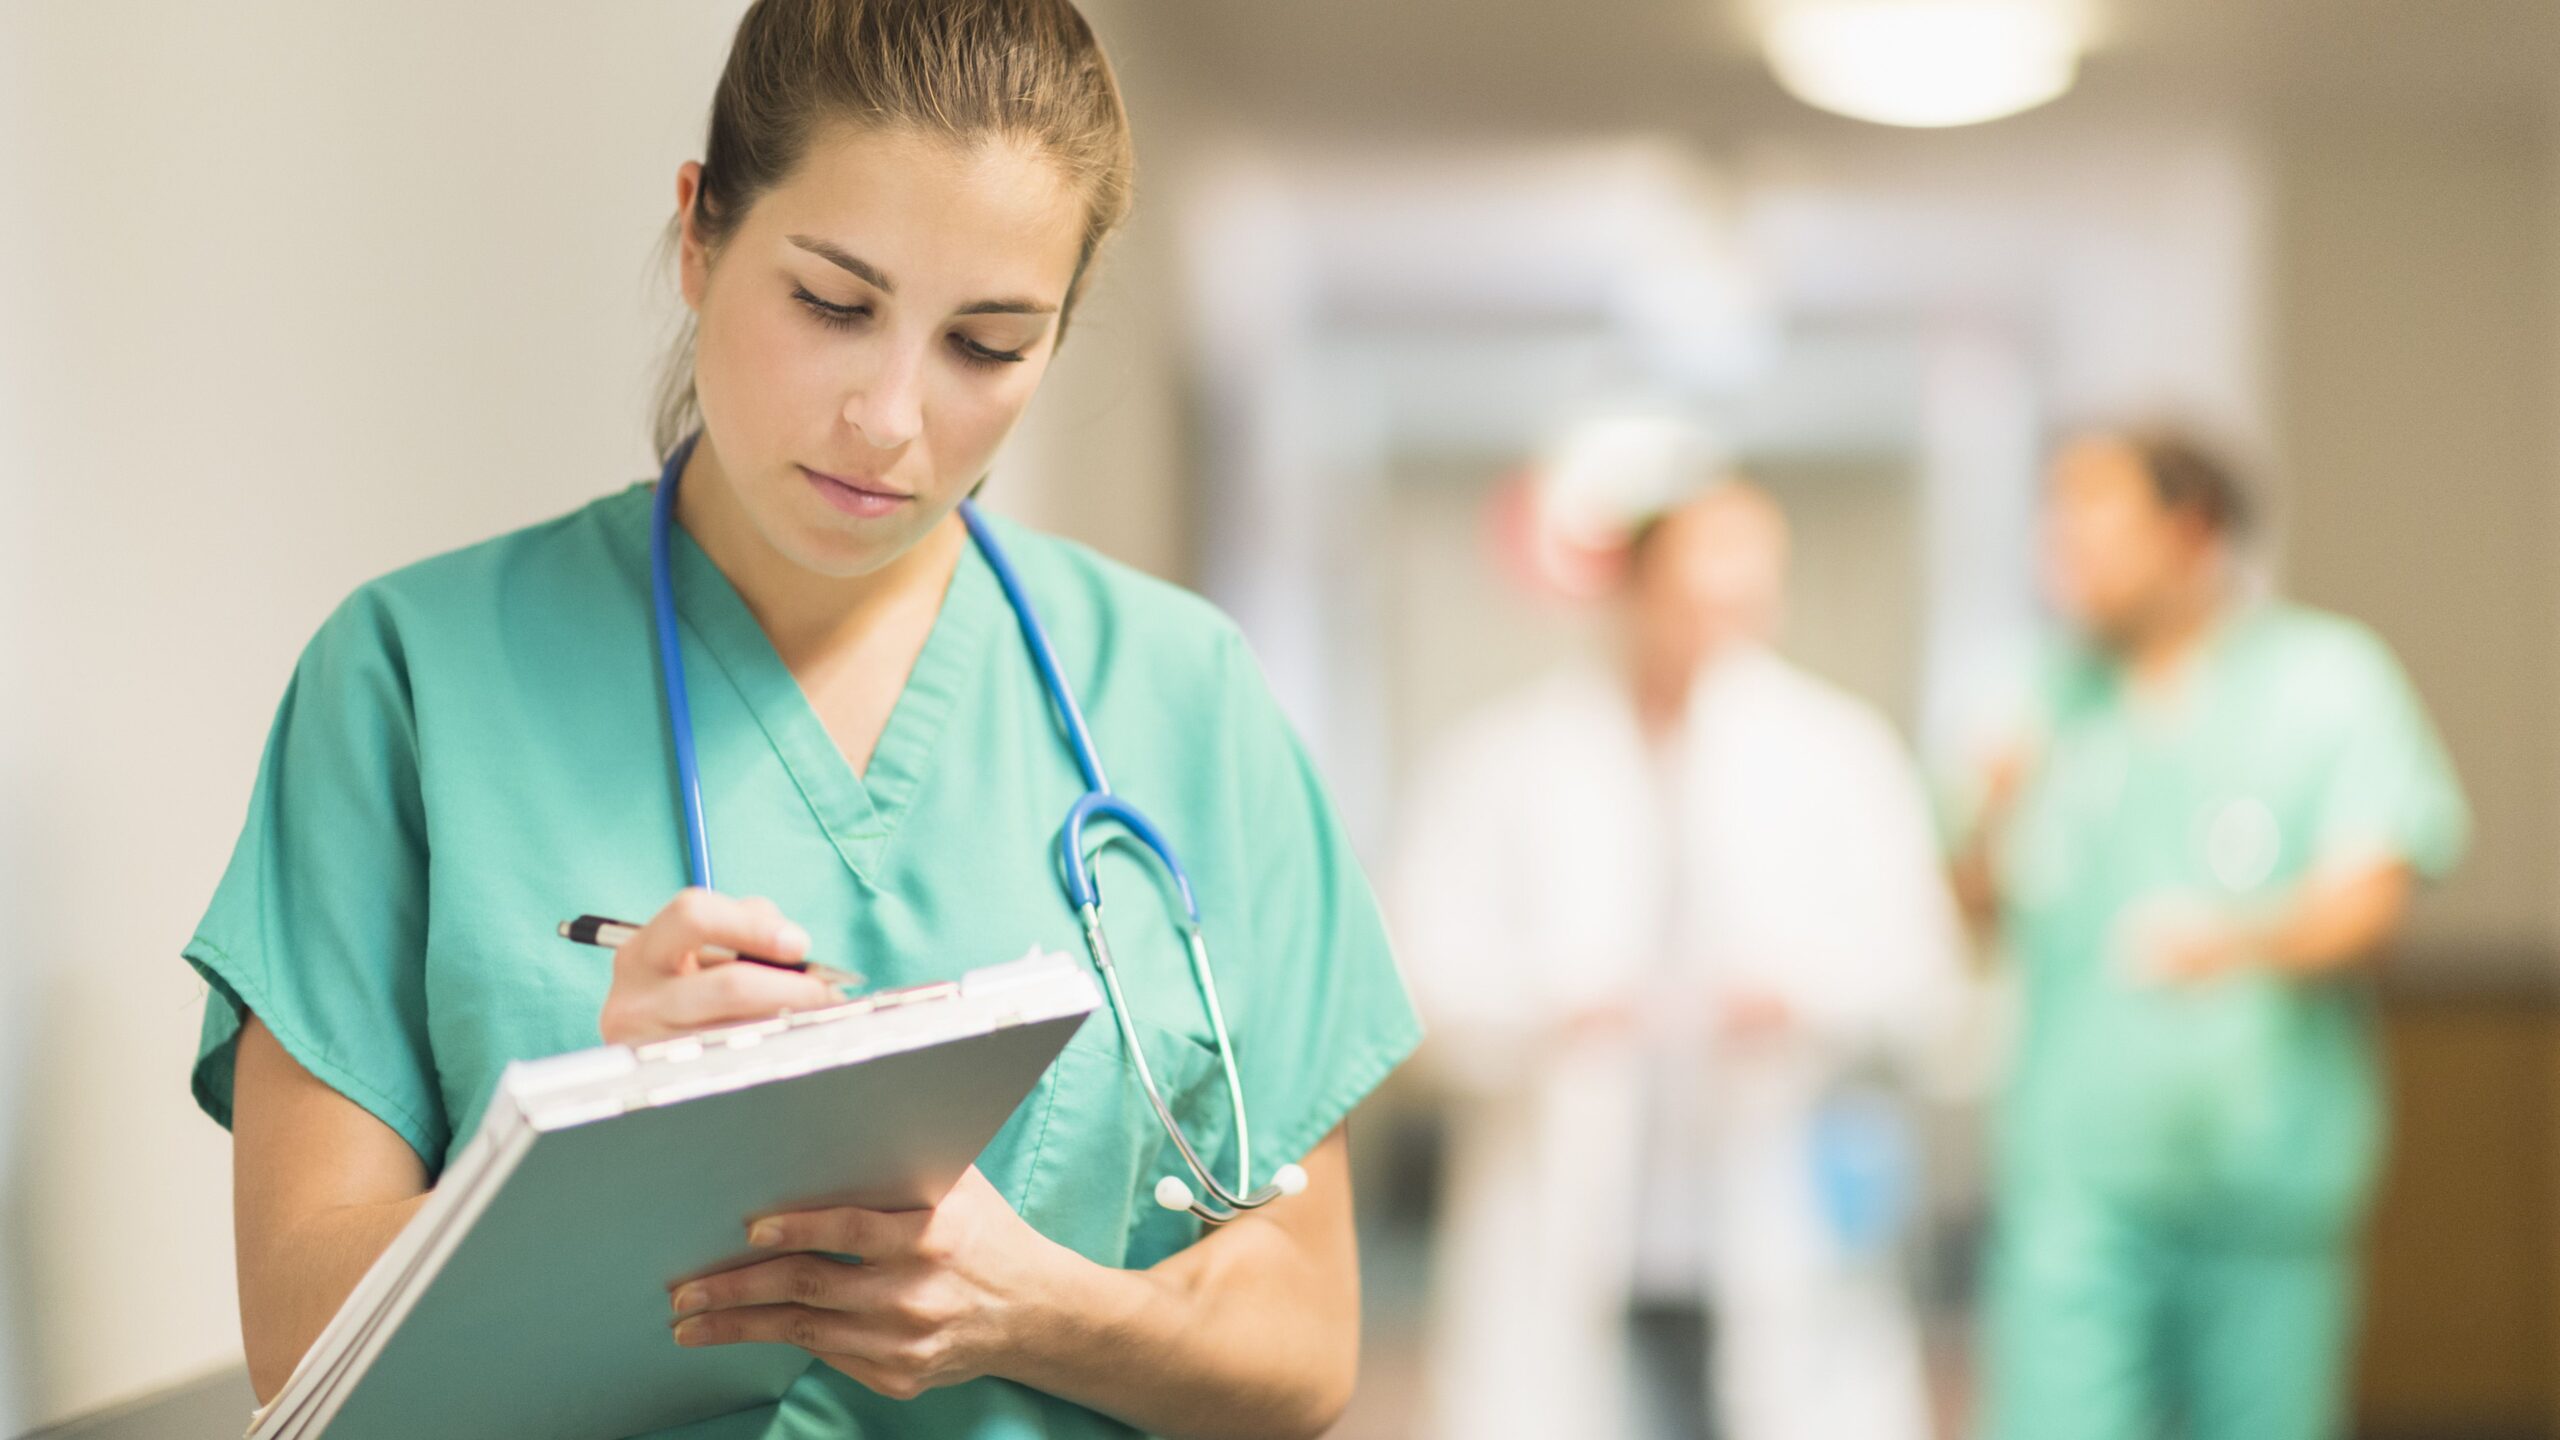 Meeting Standard Practice Requirements for Enrolled Nurses